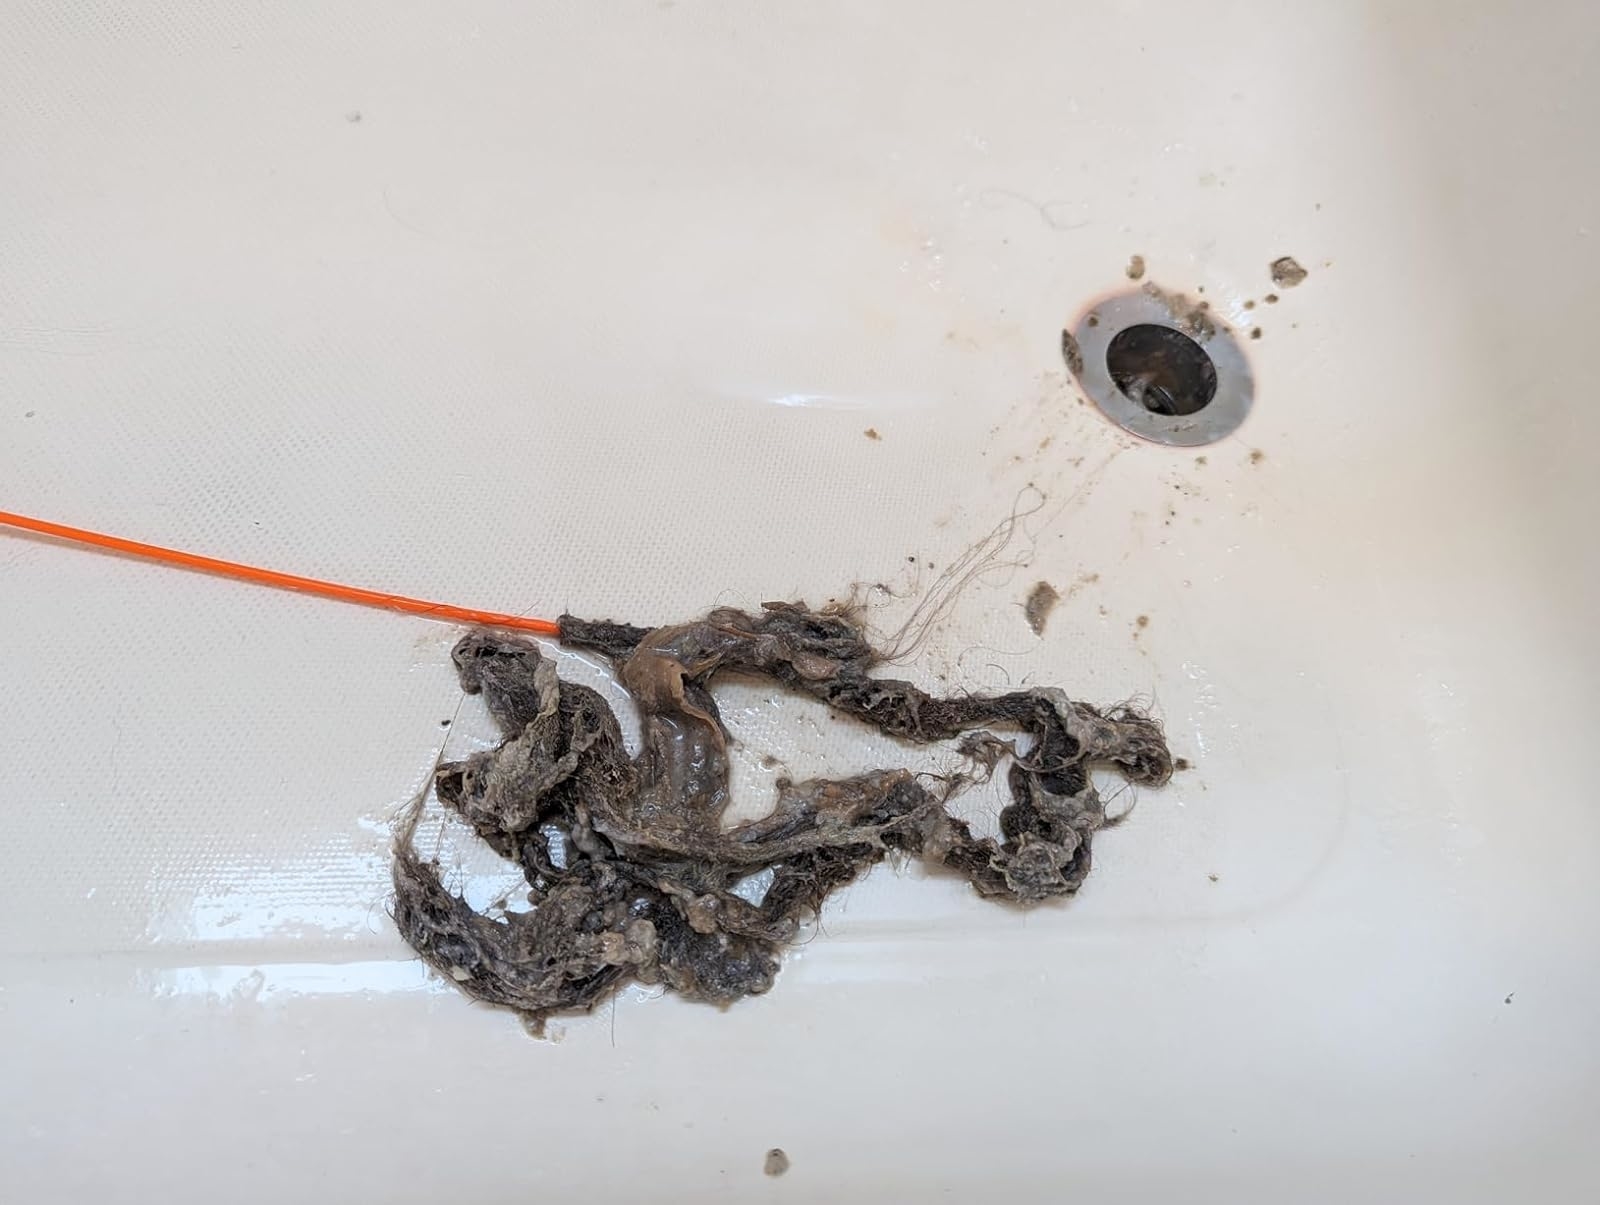 Drain clog removal tool extracting buildup from a sink, indicating maintenance or cleaning products